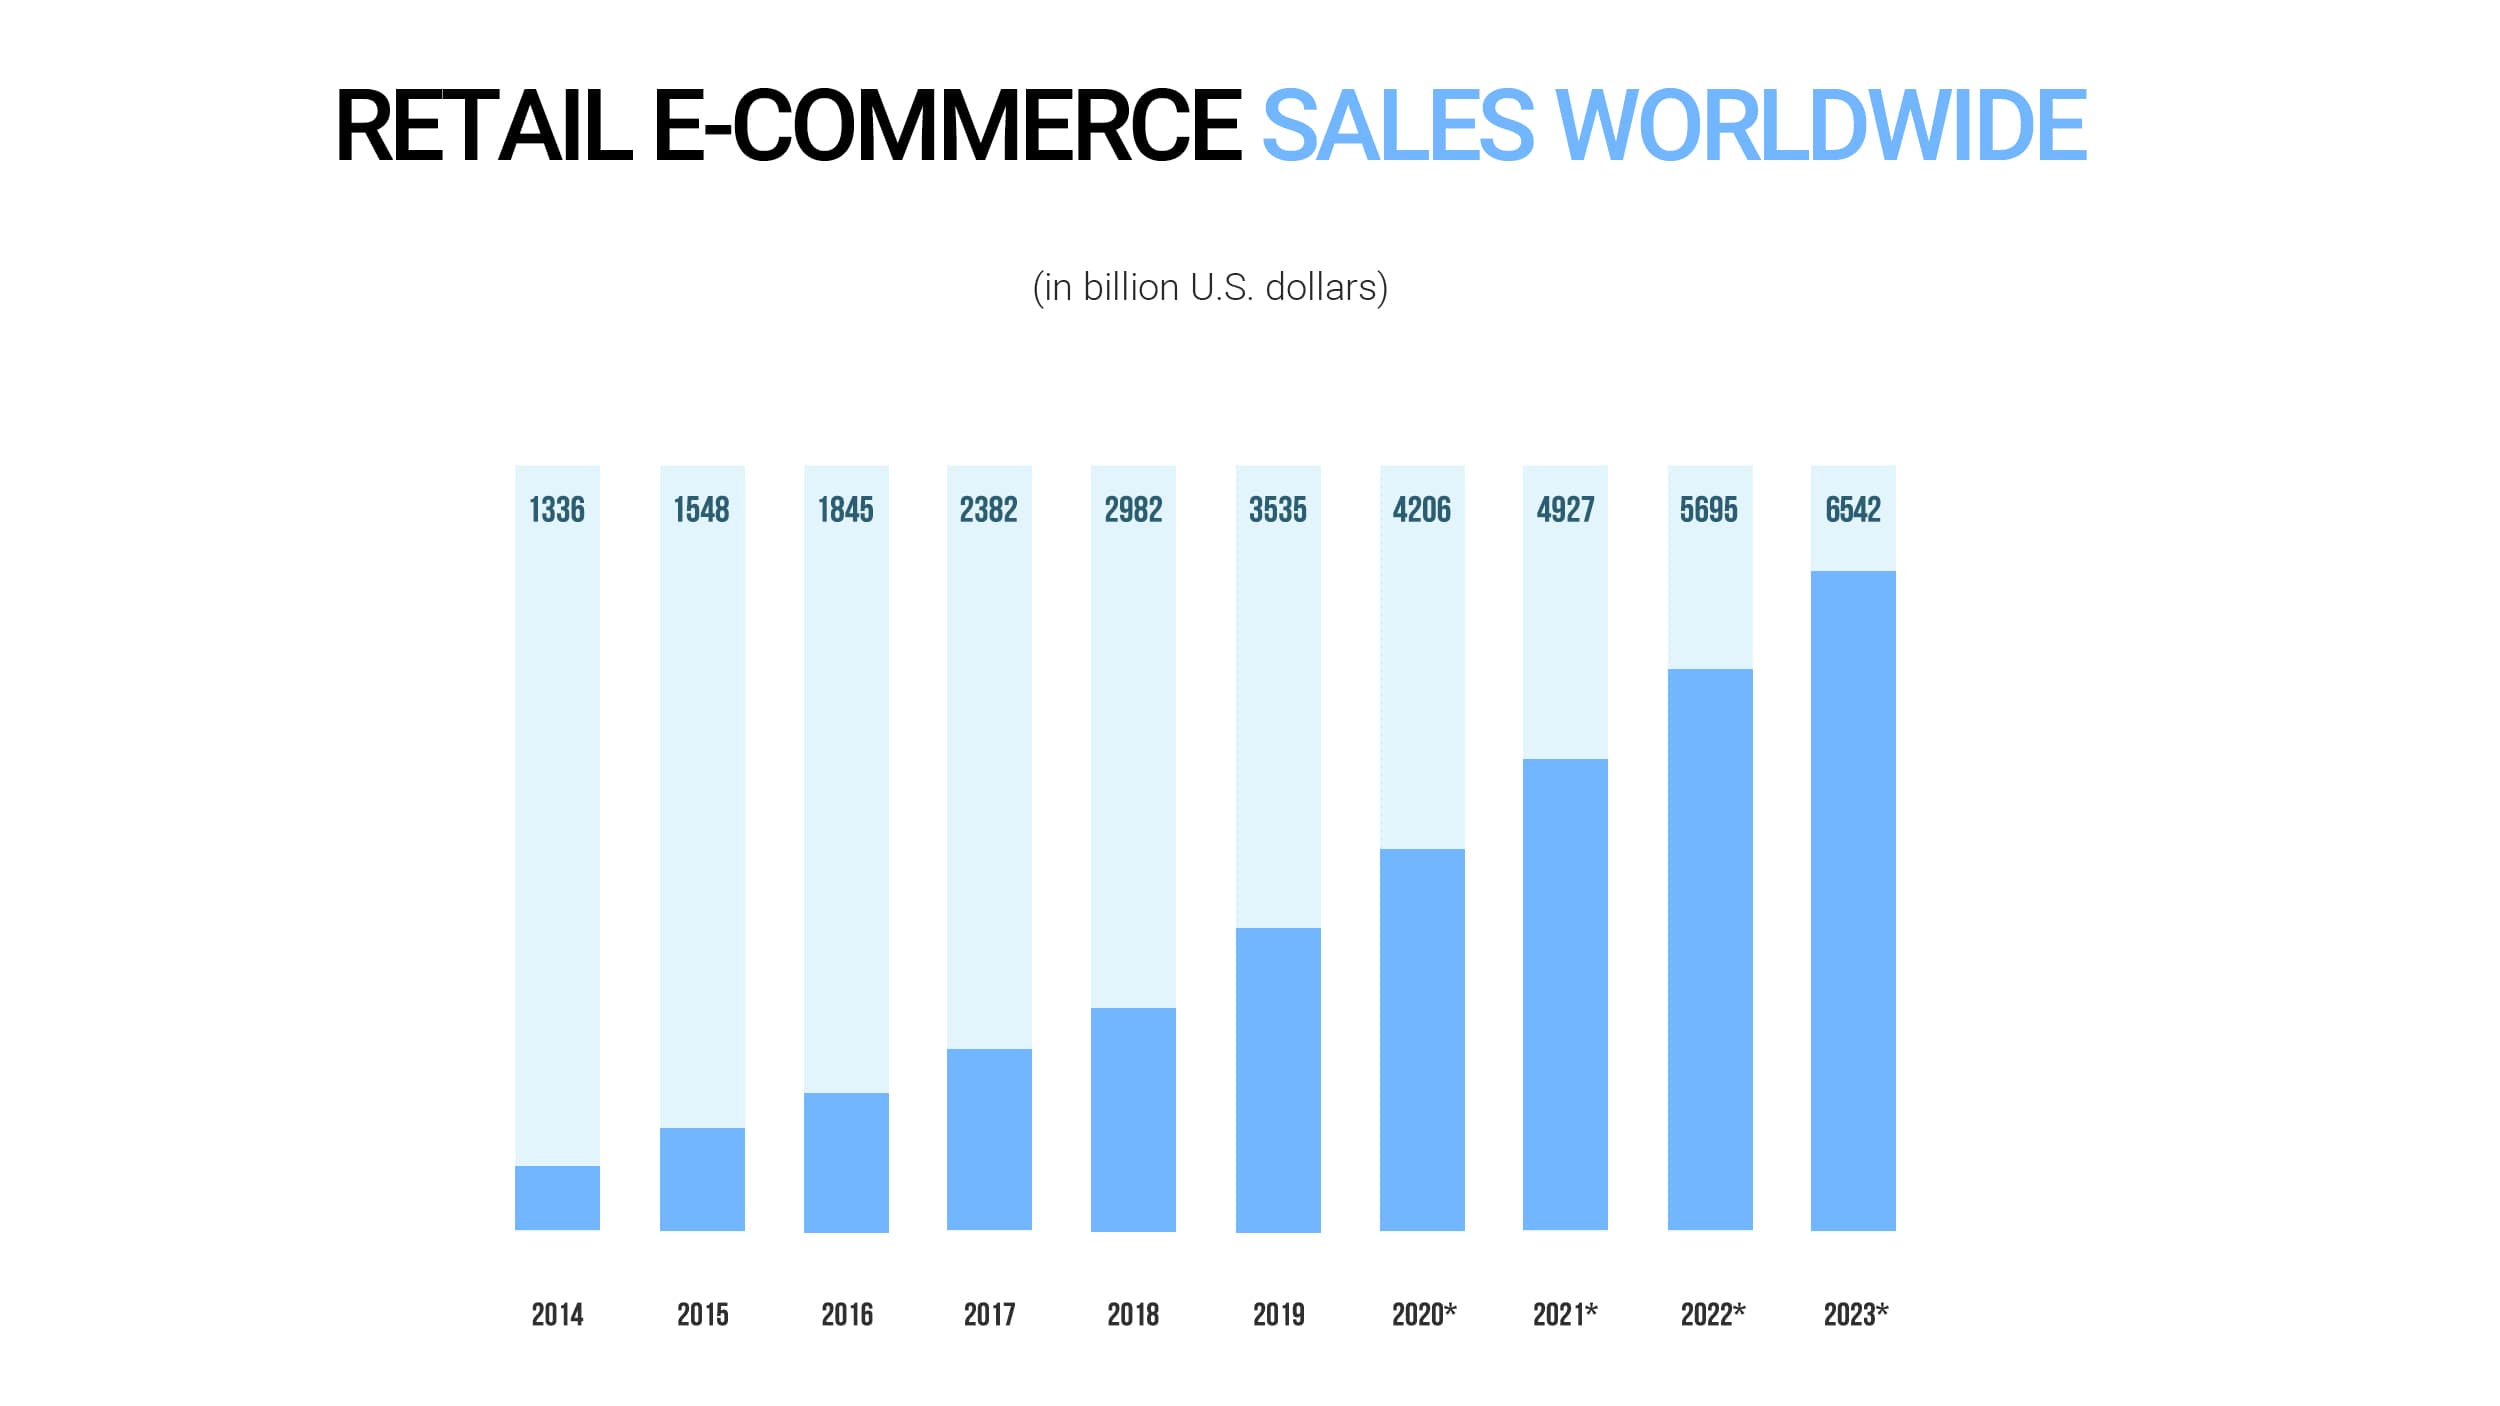 Retail e-commerce sales worldwide from 2014 to 2023